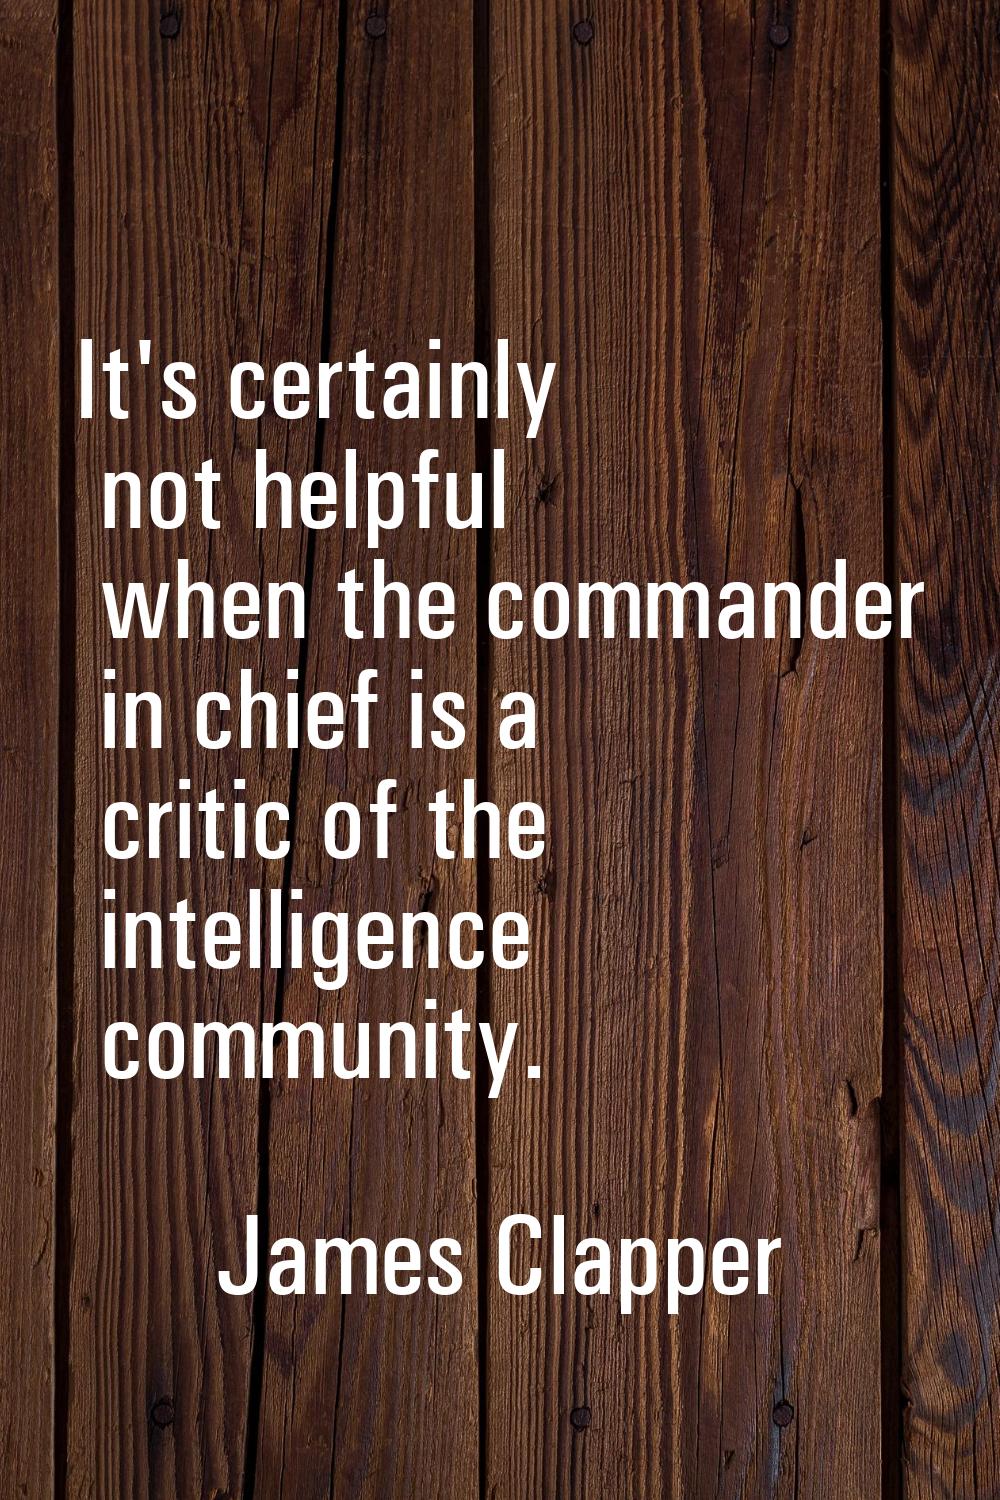 It's certainly not helpful when the commander in chief is a critic of the intelligence community.